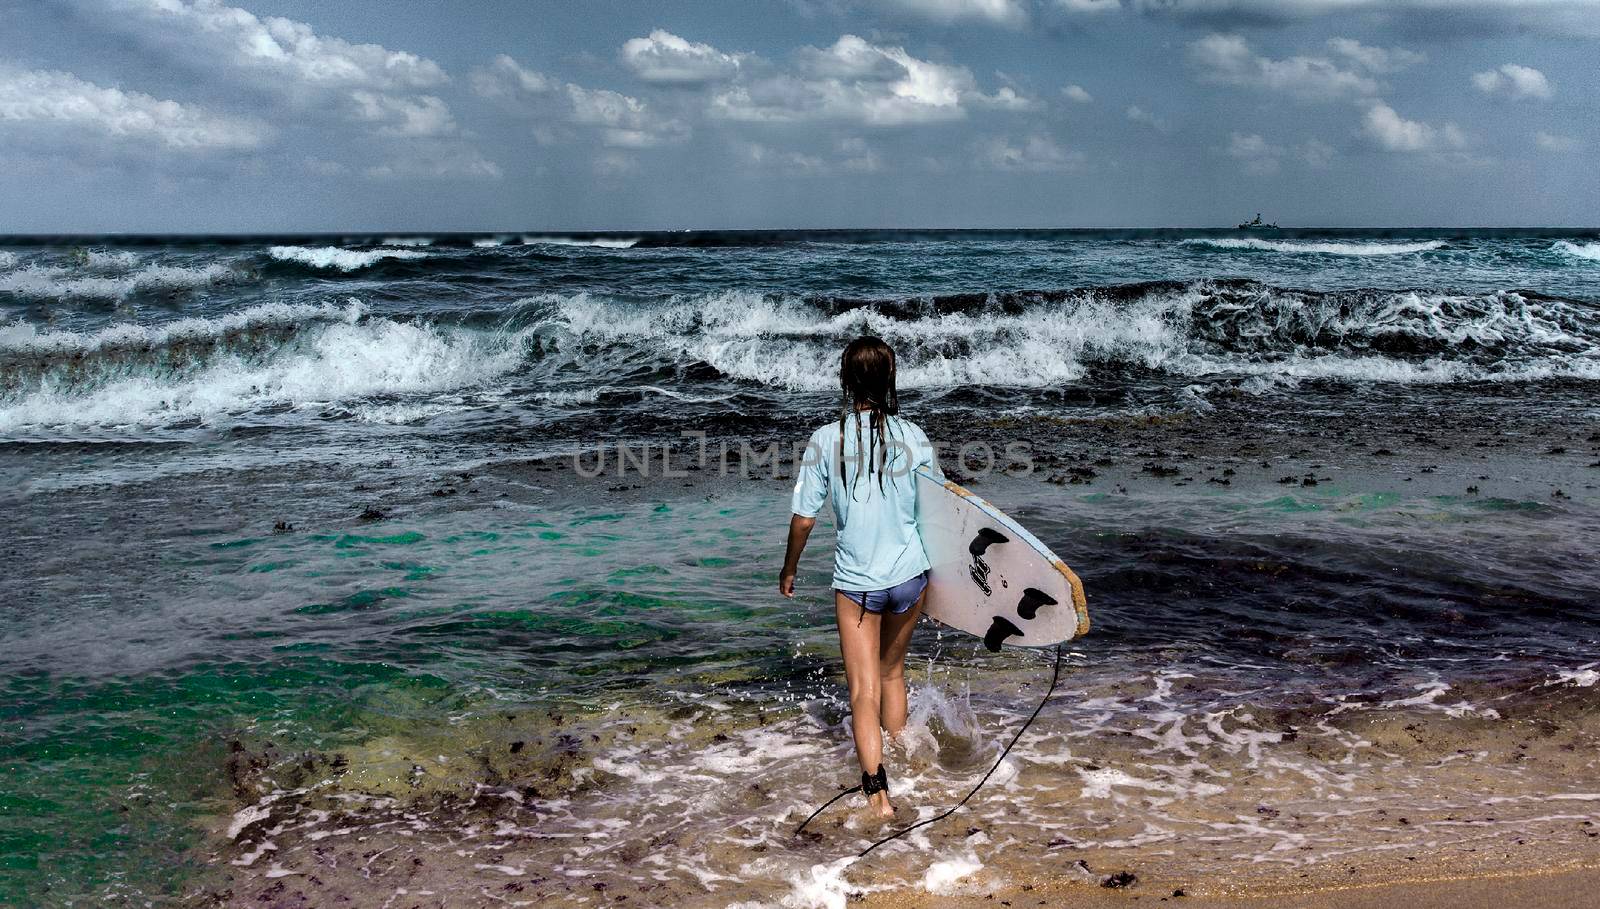 Young girl fearlessly goes into the sea to surf hoping to catch a big wave